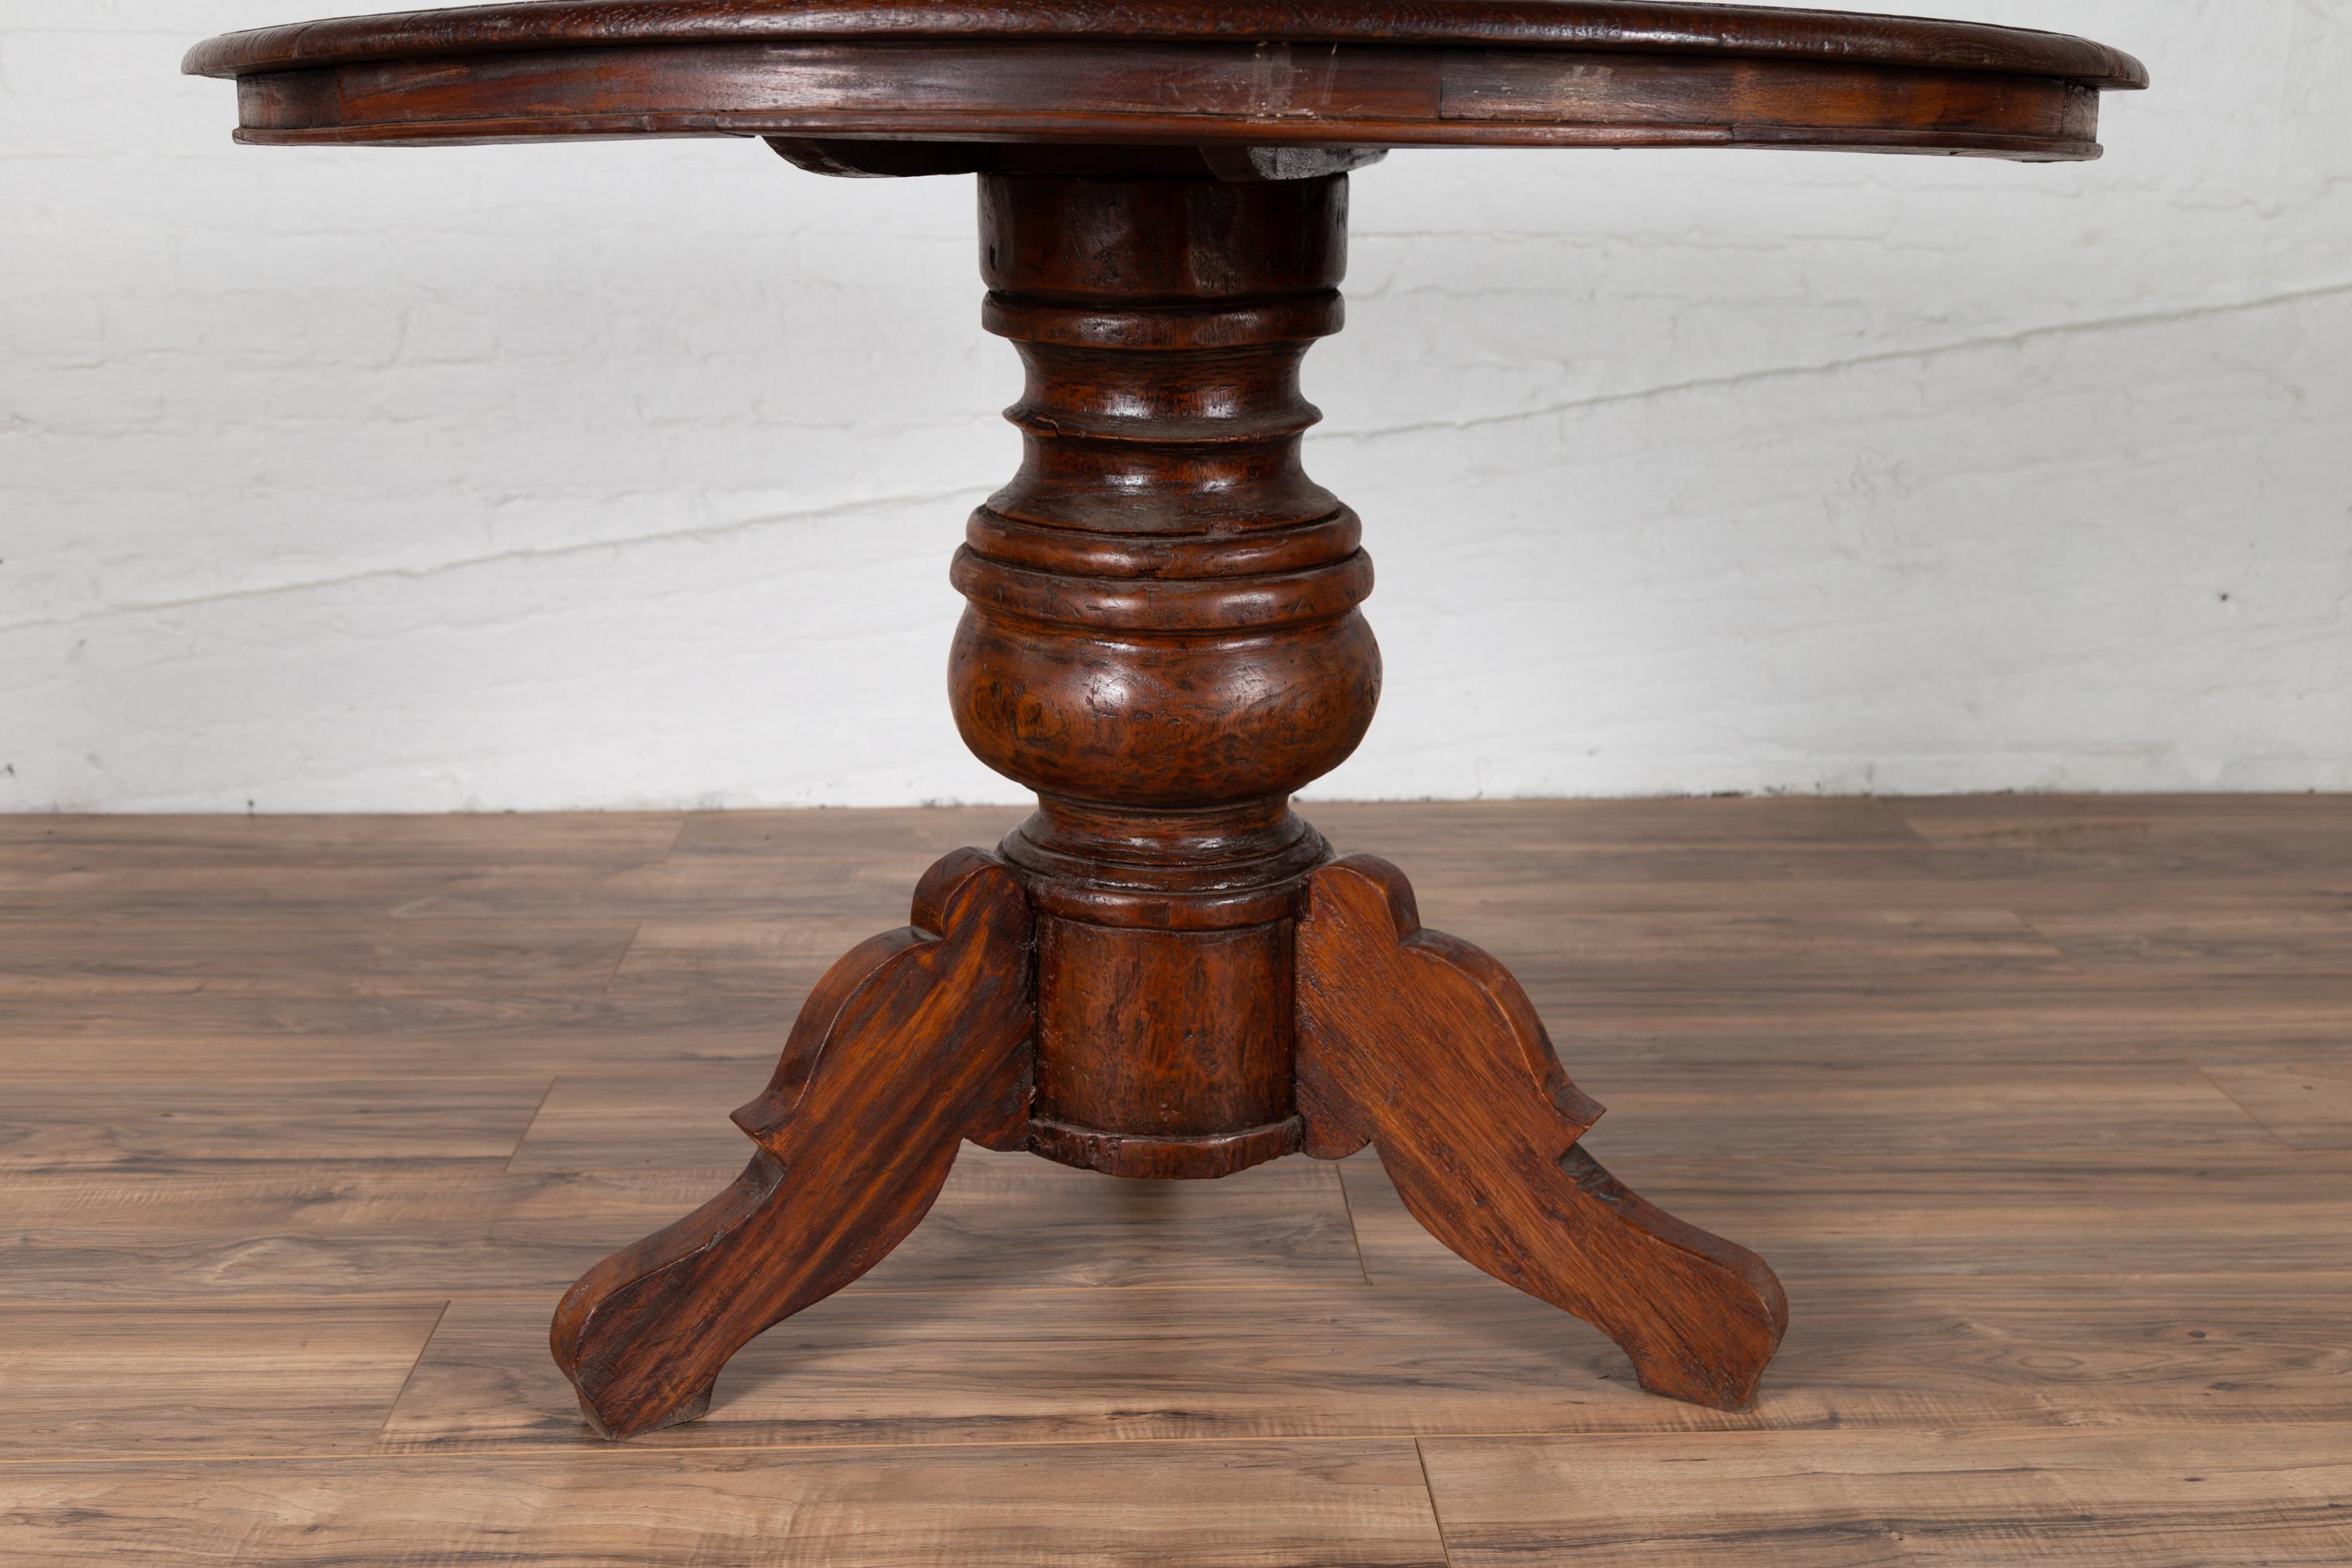 Dutch Colonial Javanese Pedestal Tripod Table with Circular Top and Turned Base 1